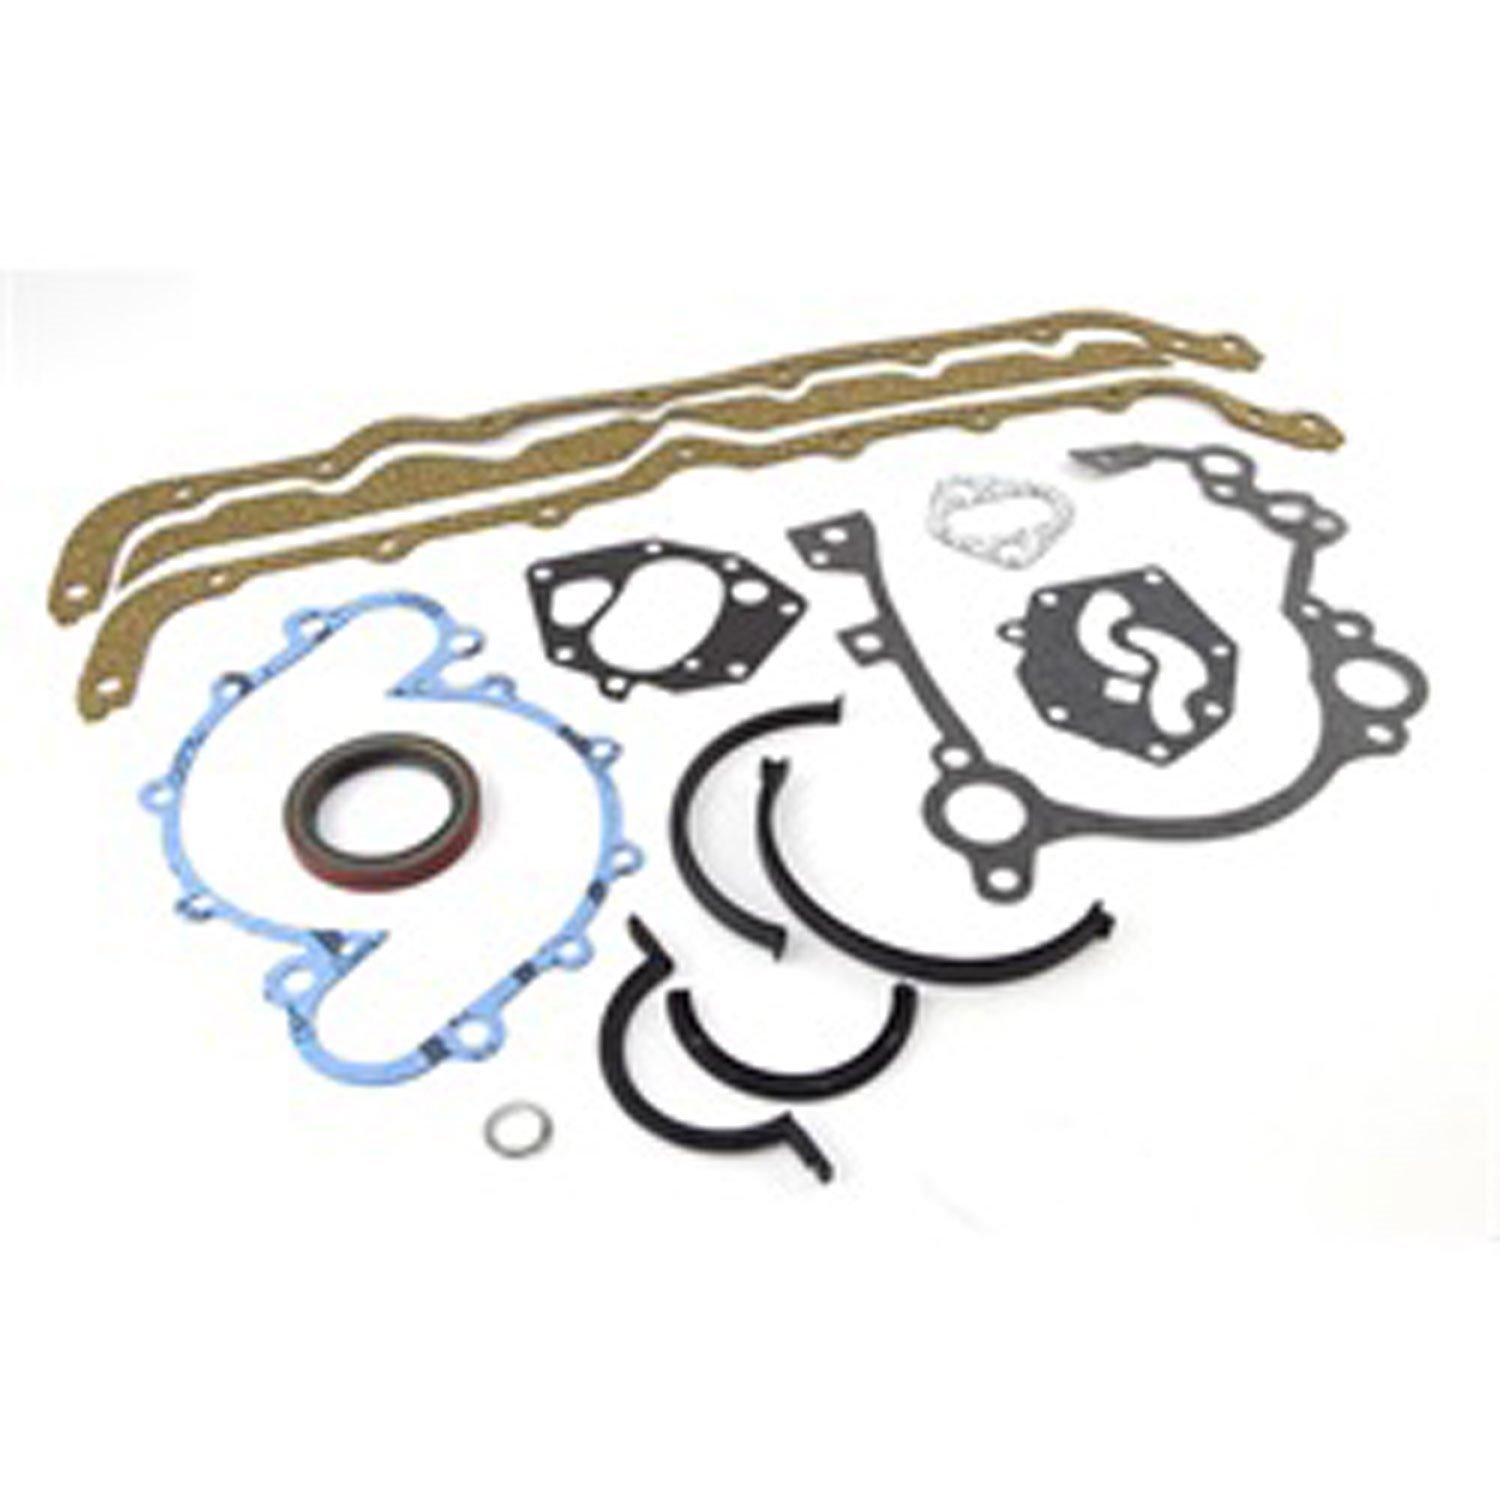 This lower engine gasket set from Omix-ADA fits 72-81 Jeep CJ and SJ models with a 5.0L engine and 7